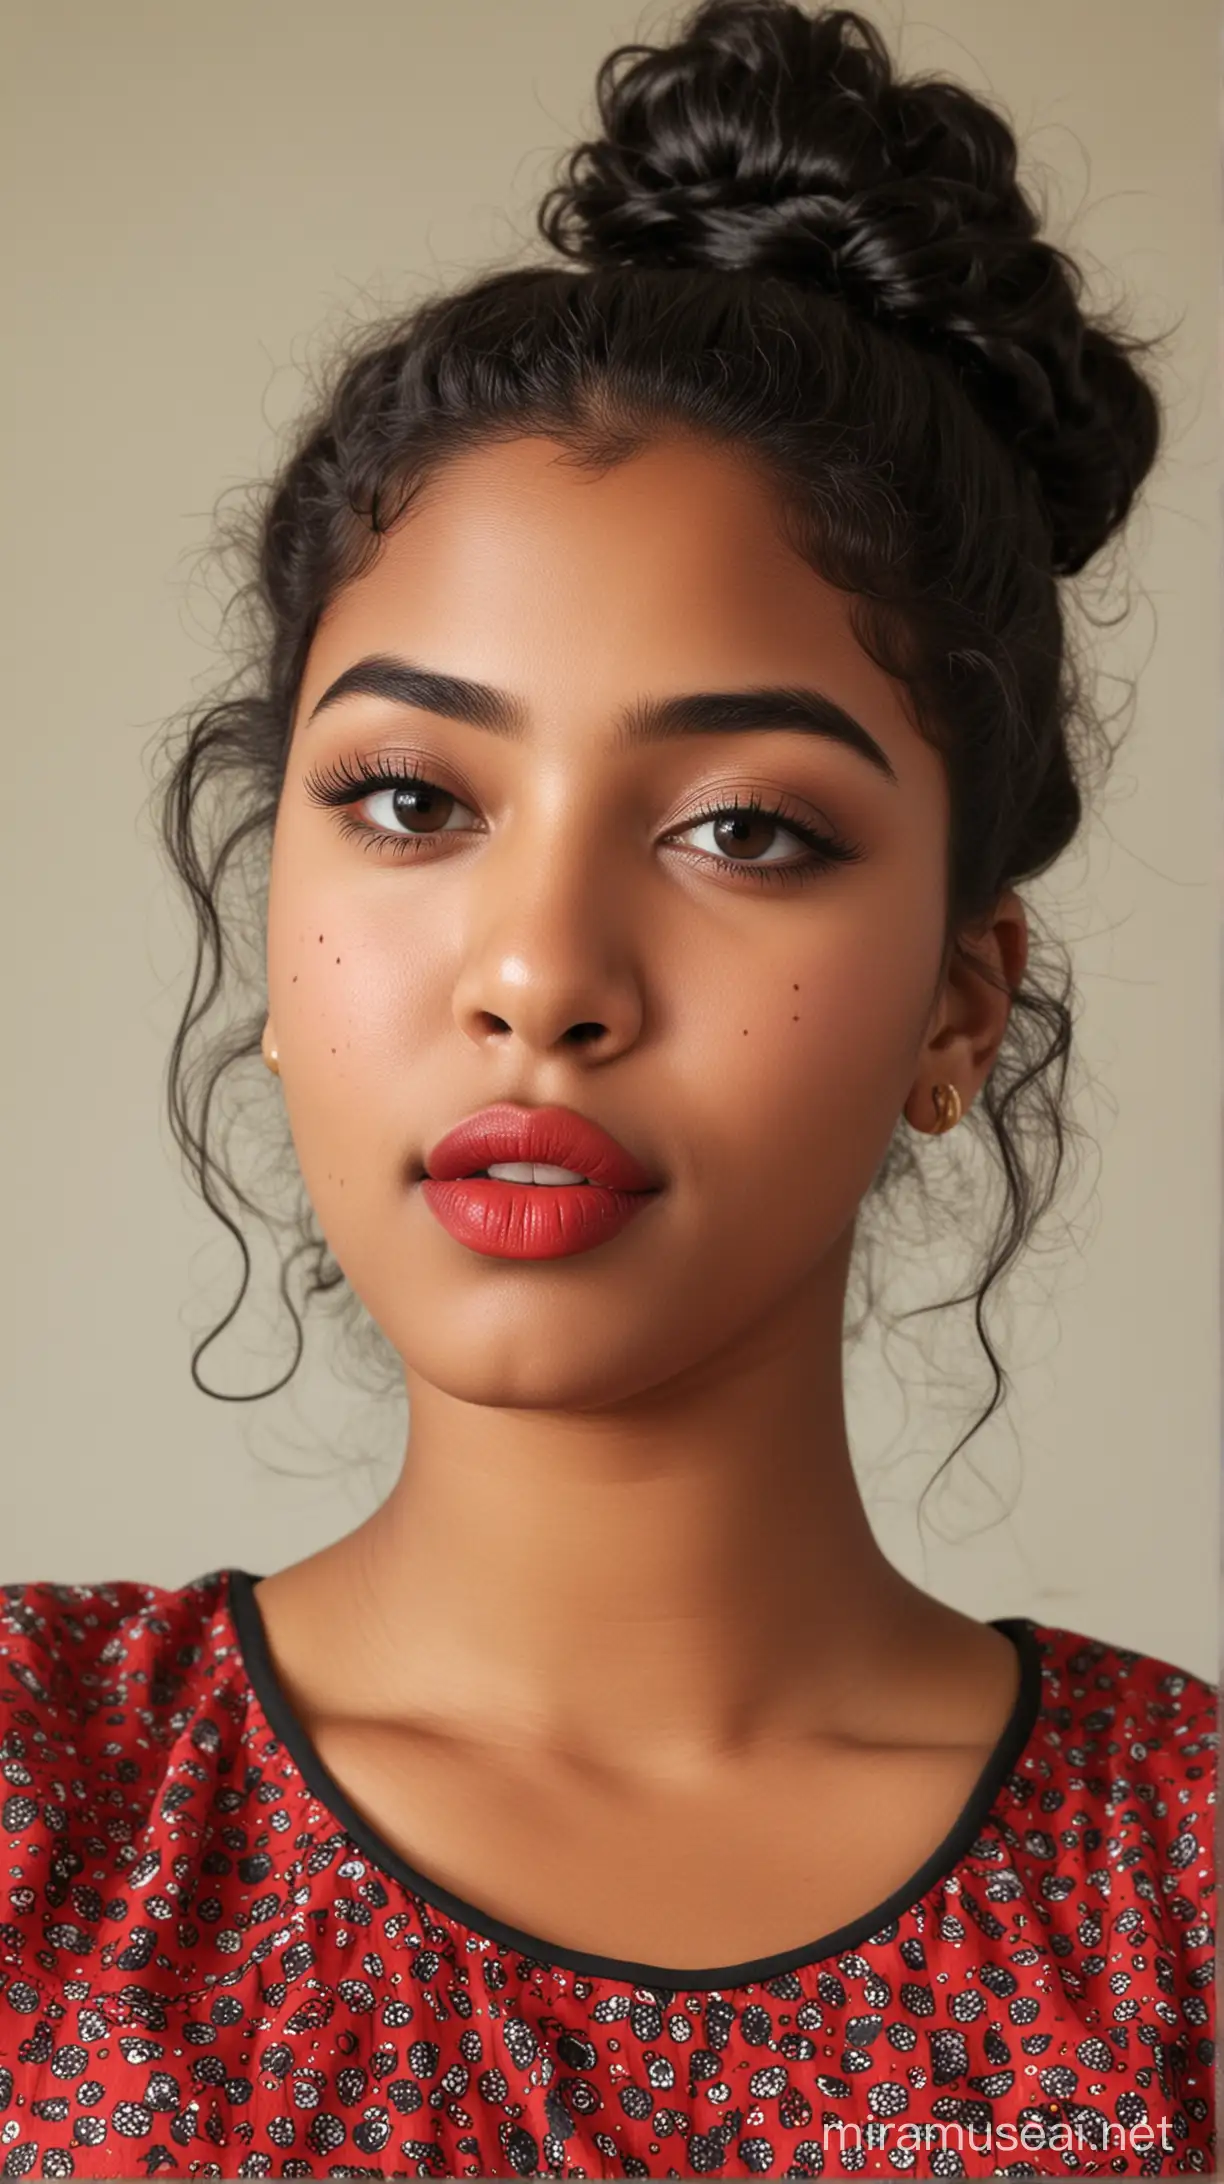 Portrait of a Stylish CurlyHaired Black Teenage Girl in Traditional Kurti